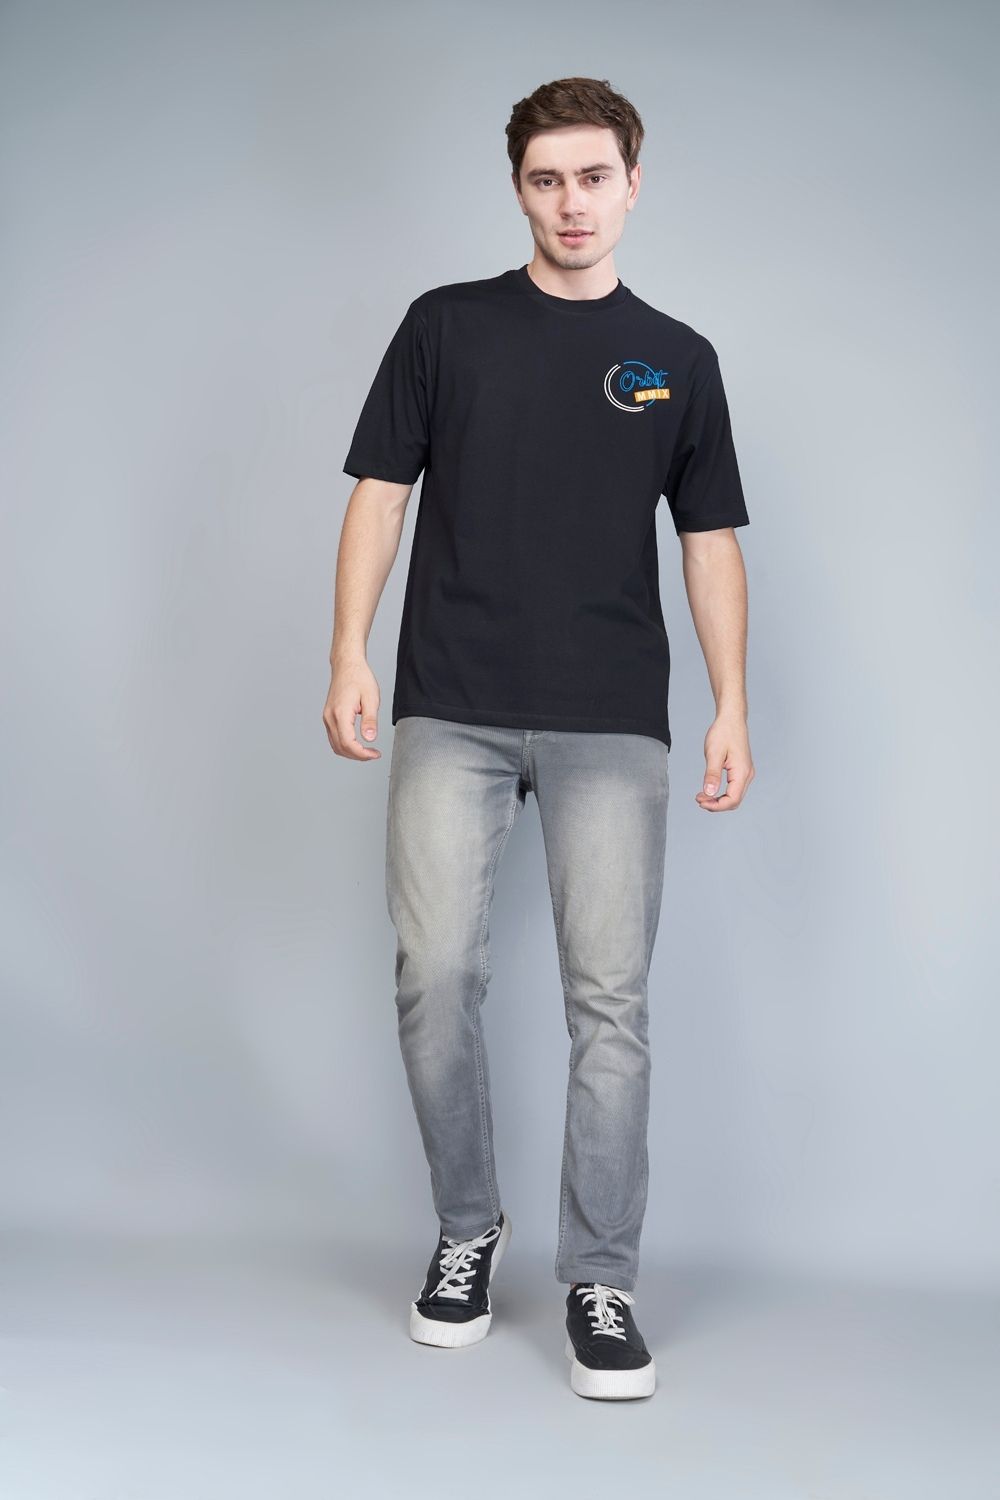 Cotton oversized T shirt for men in the solid color Dark Charcoal with half sleeves and crew neck, front view.